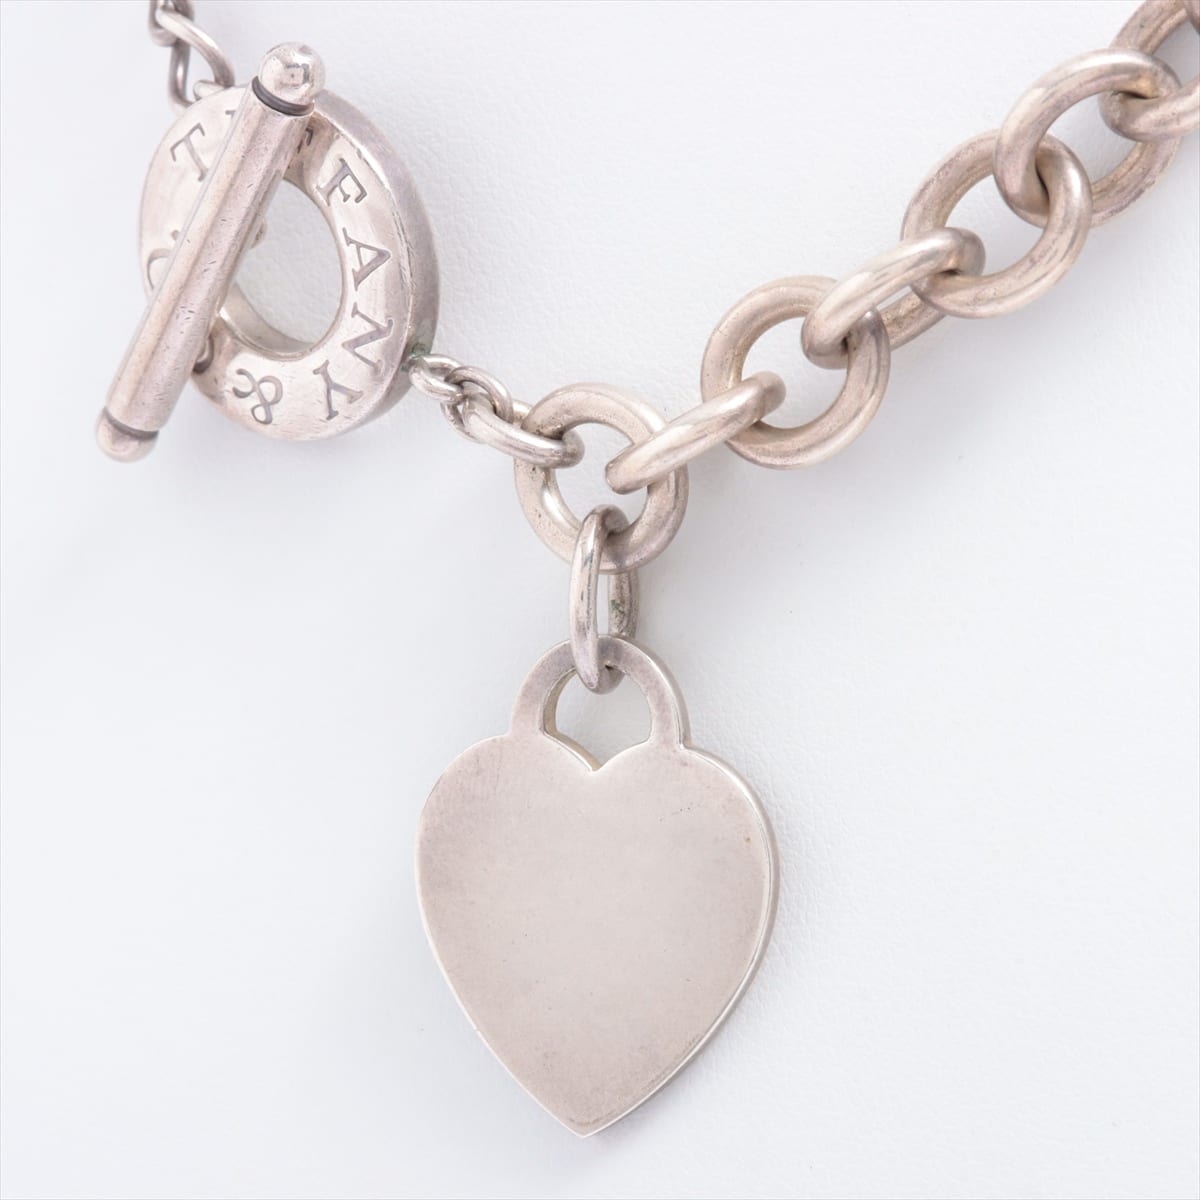 Tiffany heart tag toggle Necklace 925 Silver